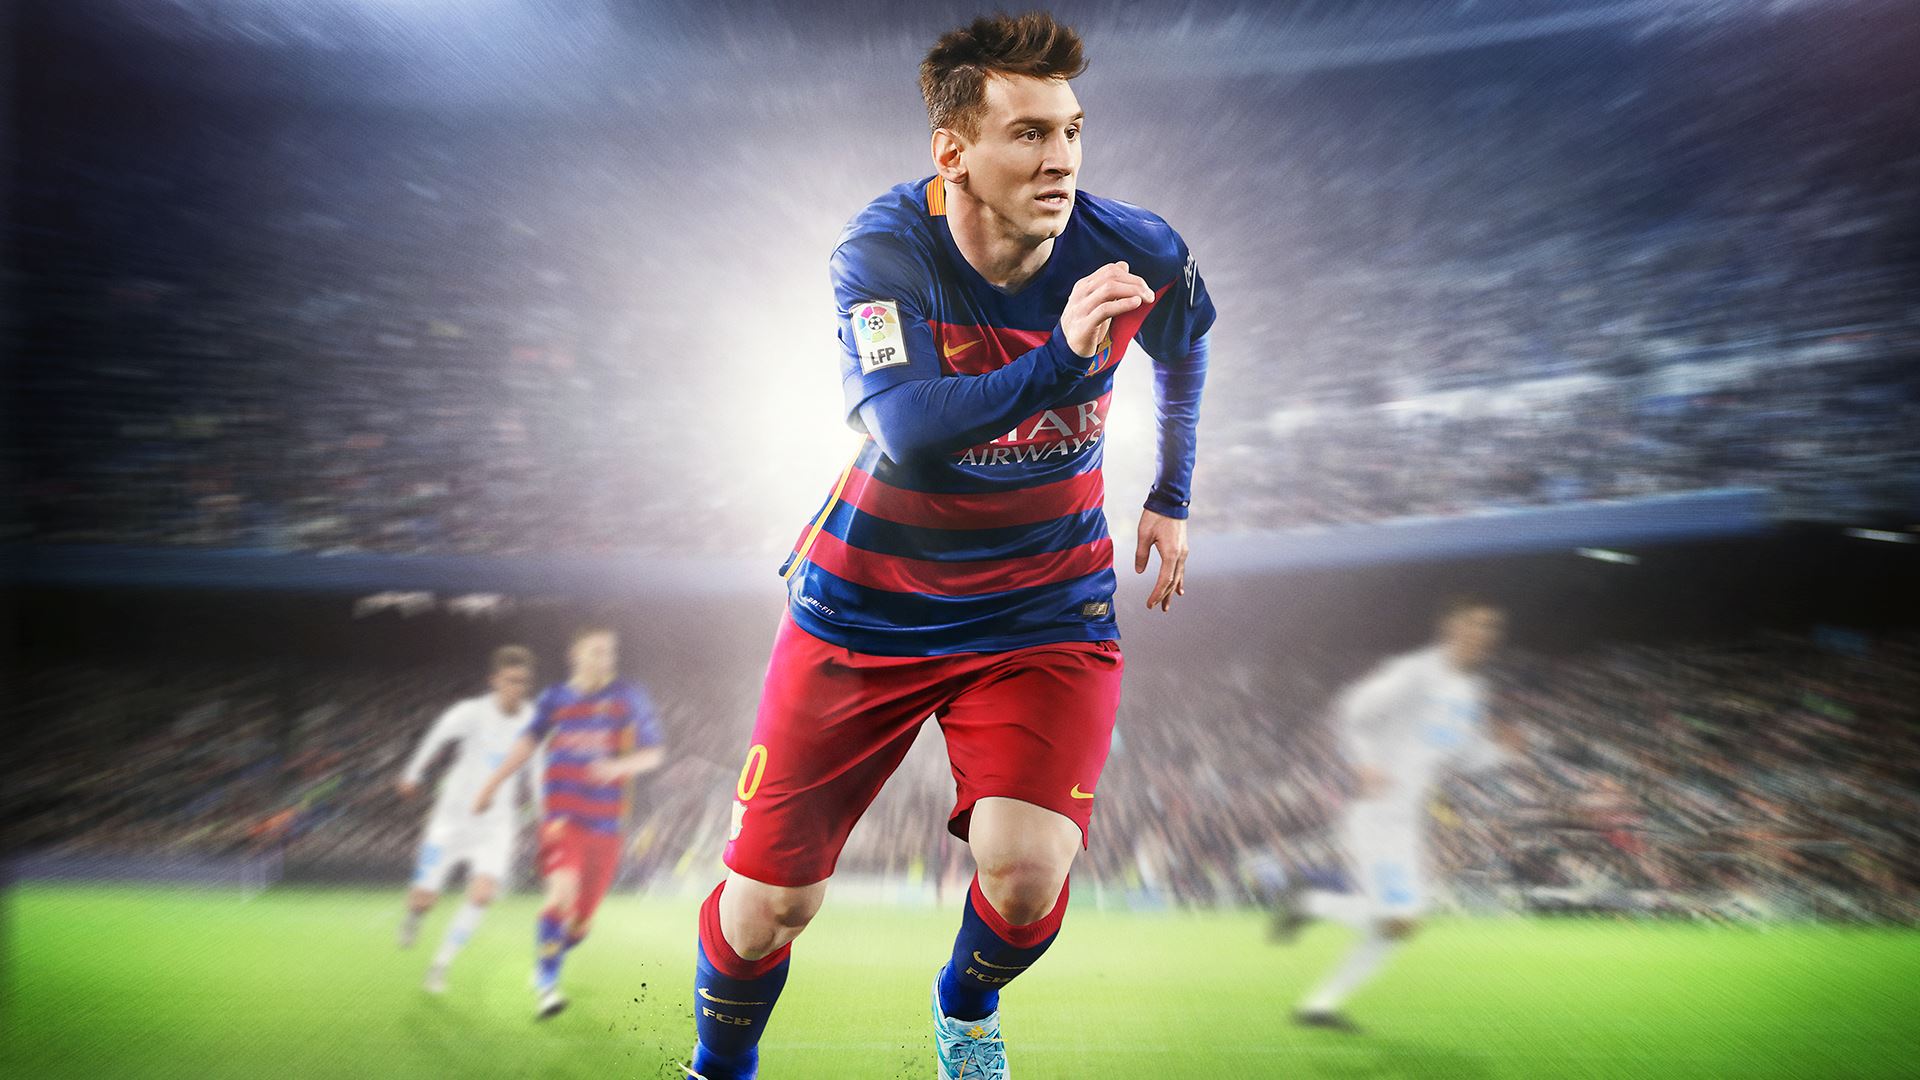 Fifa HD Wallpaper Full Pictures